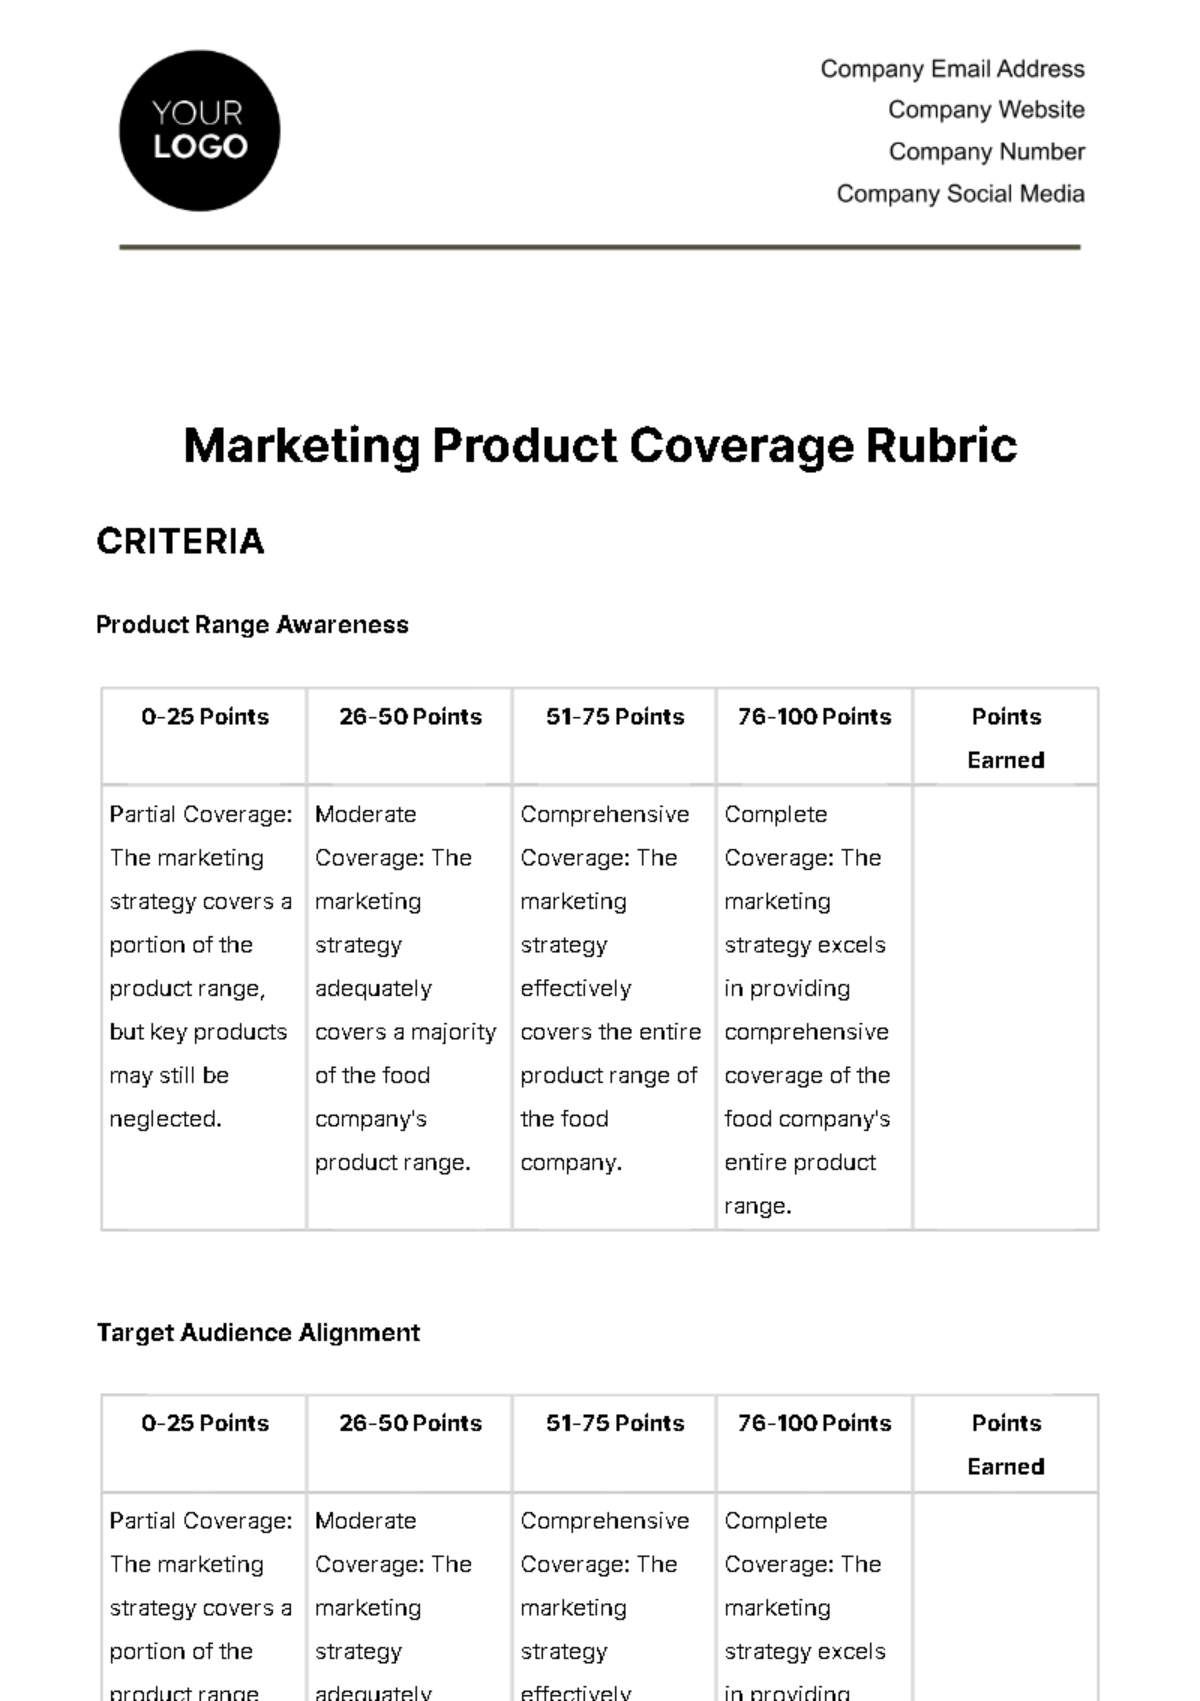 Free Marketing Product Coverage Rubric Template